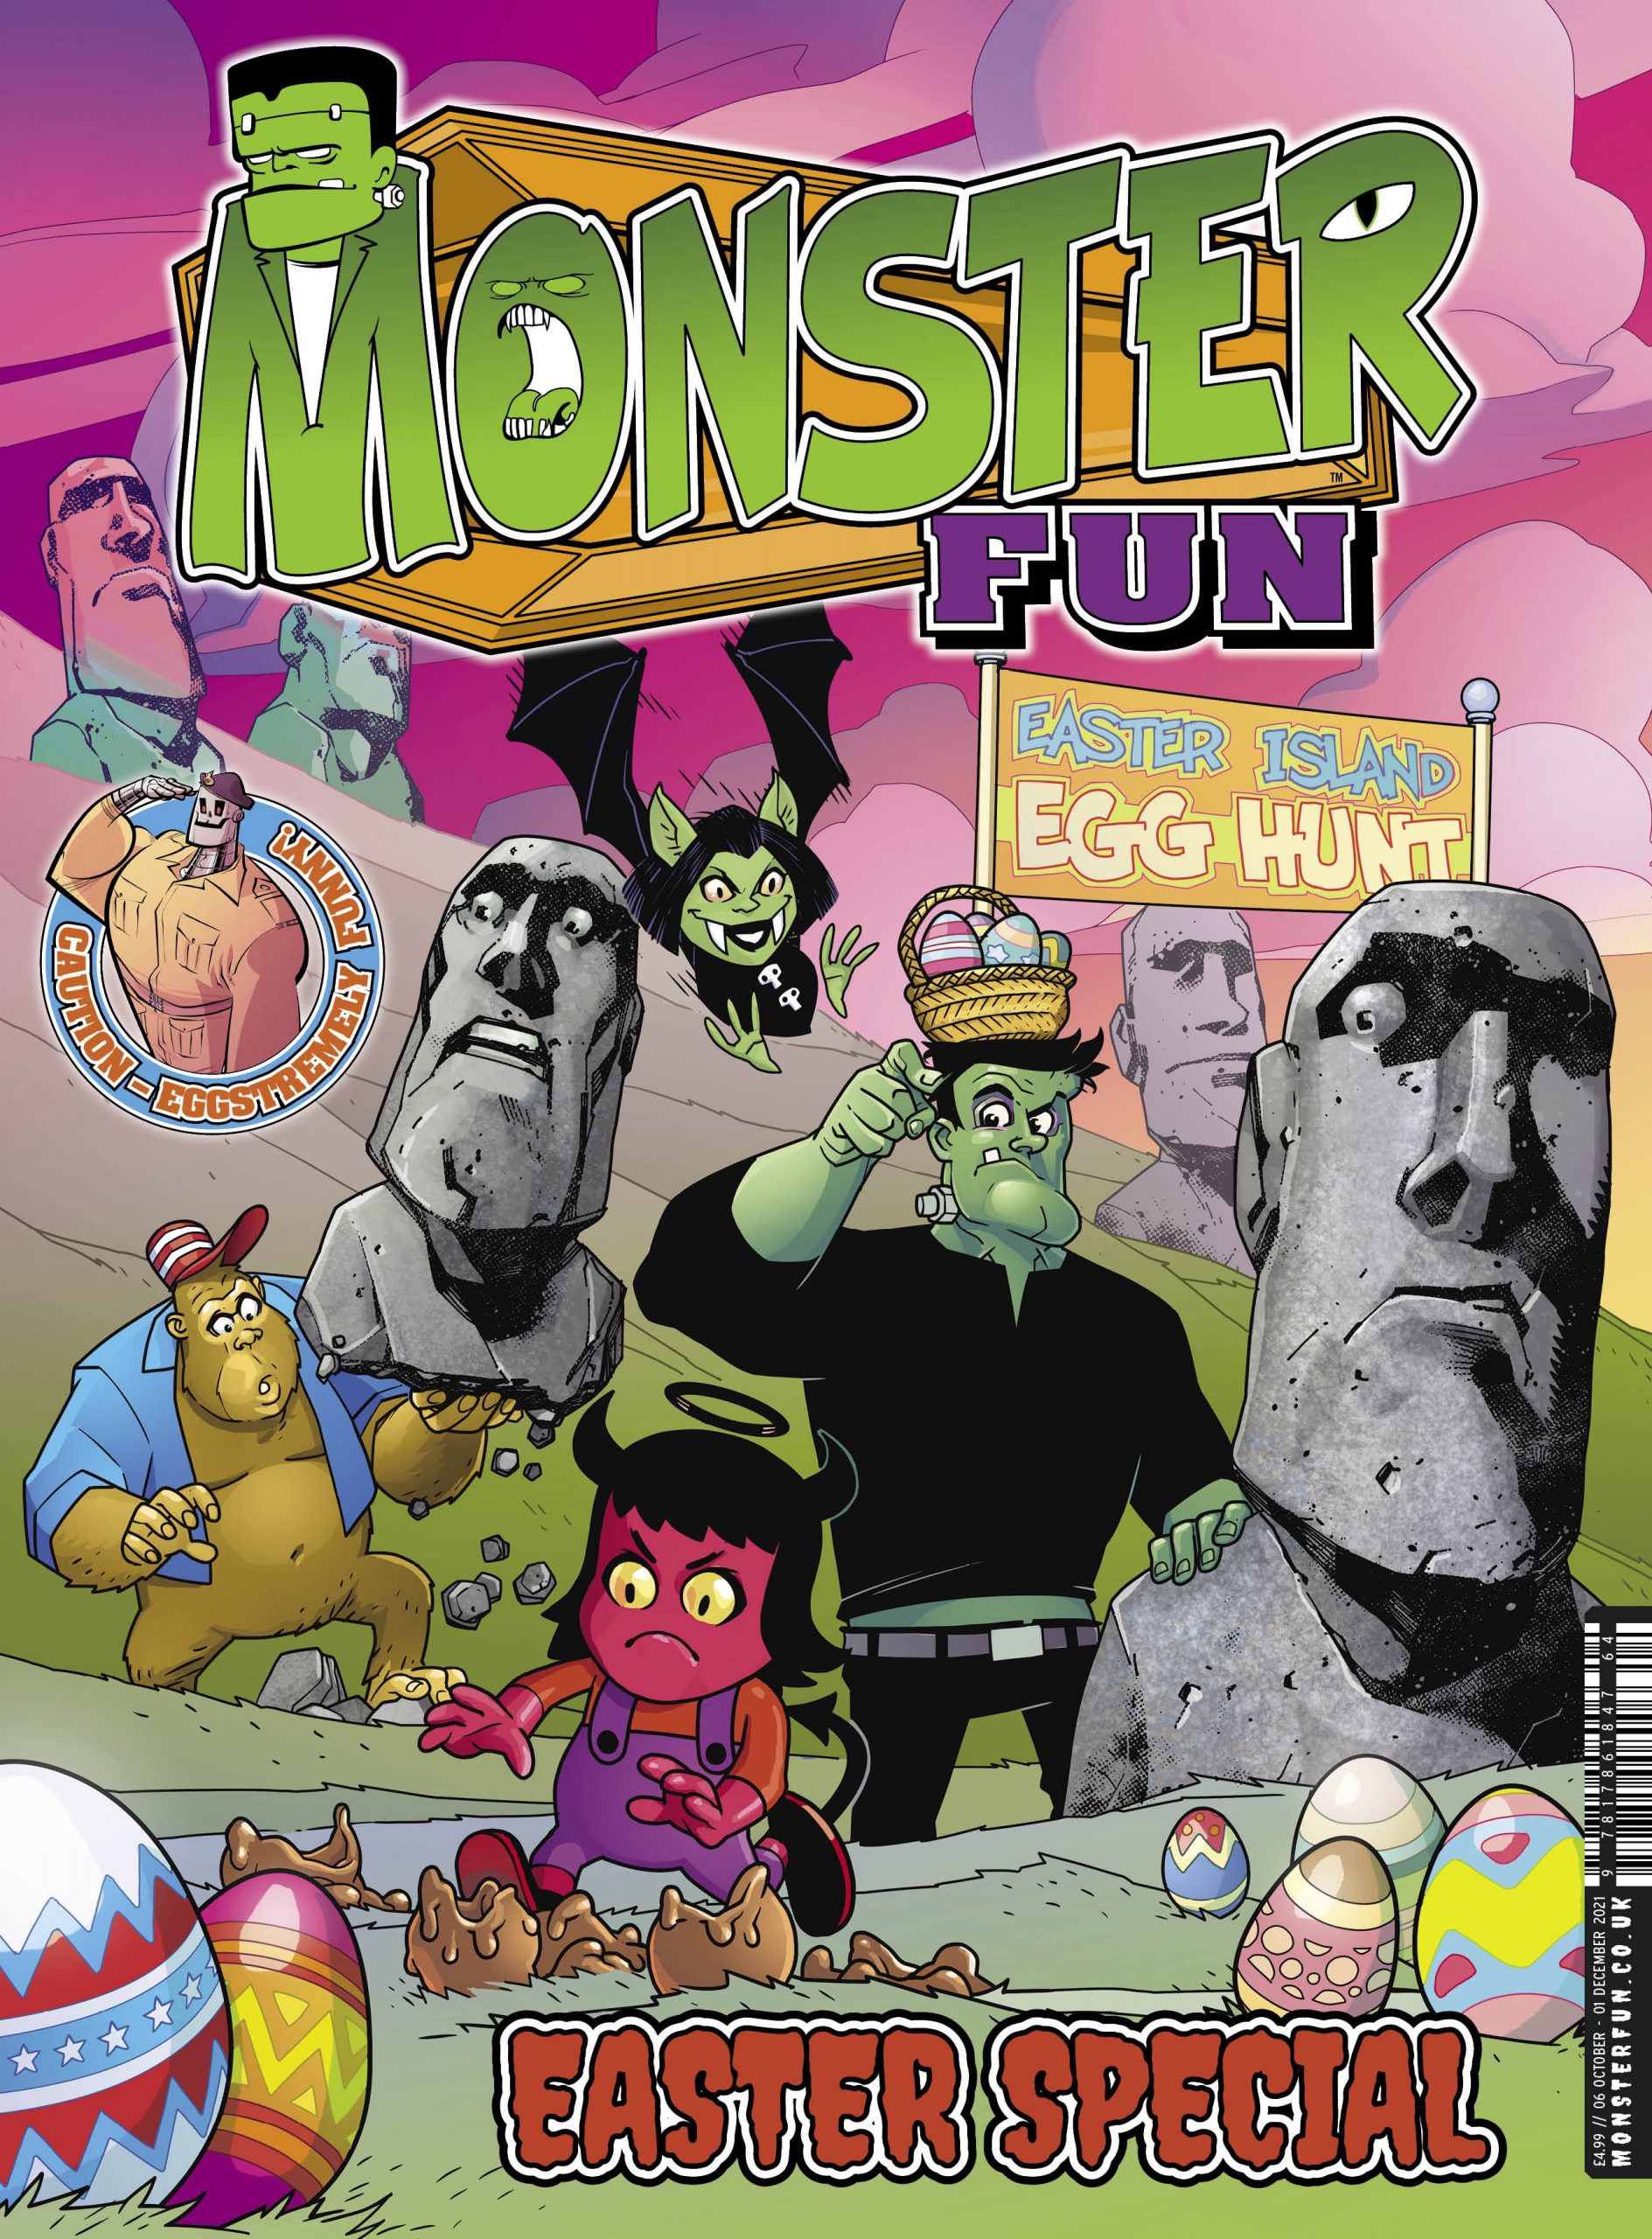 Monster Fun #1 - Cover by Neil Googe